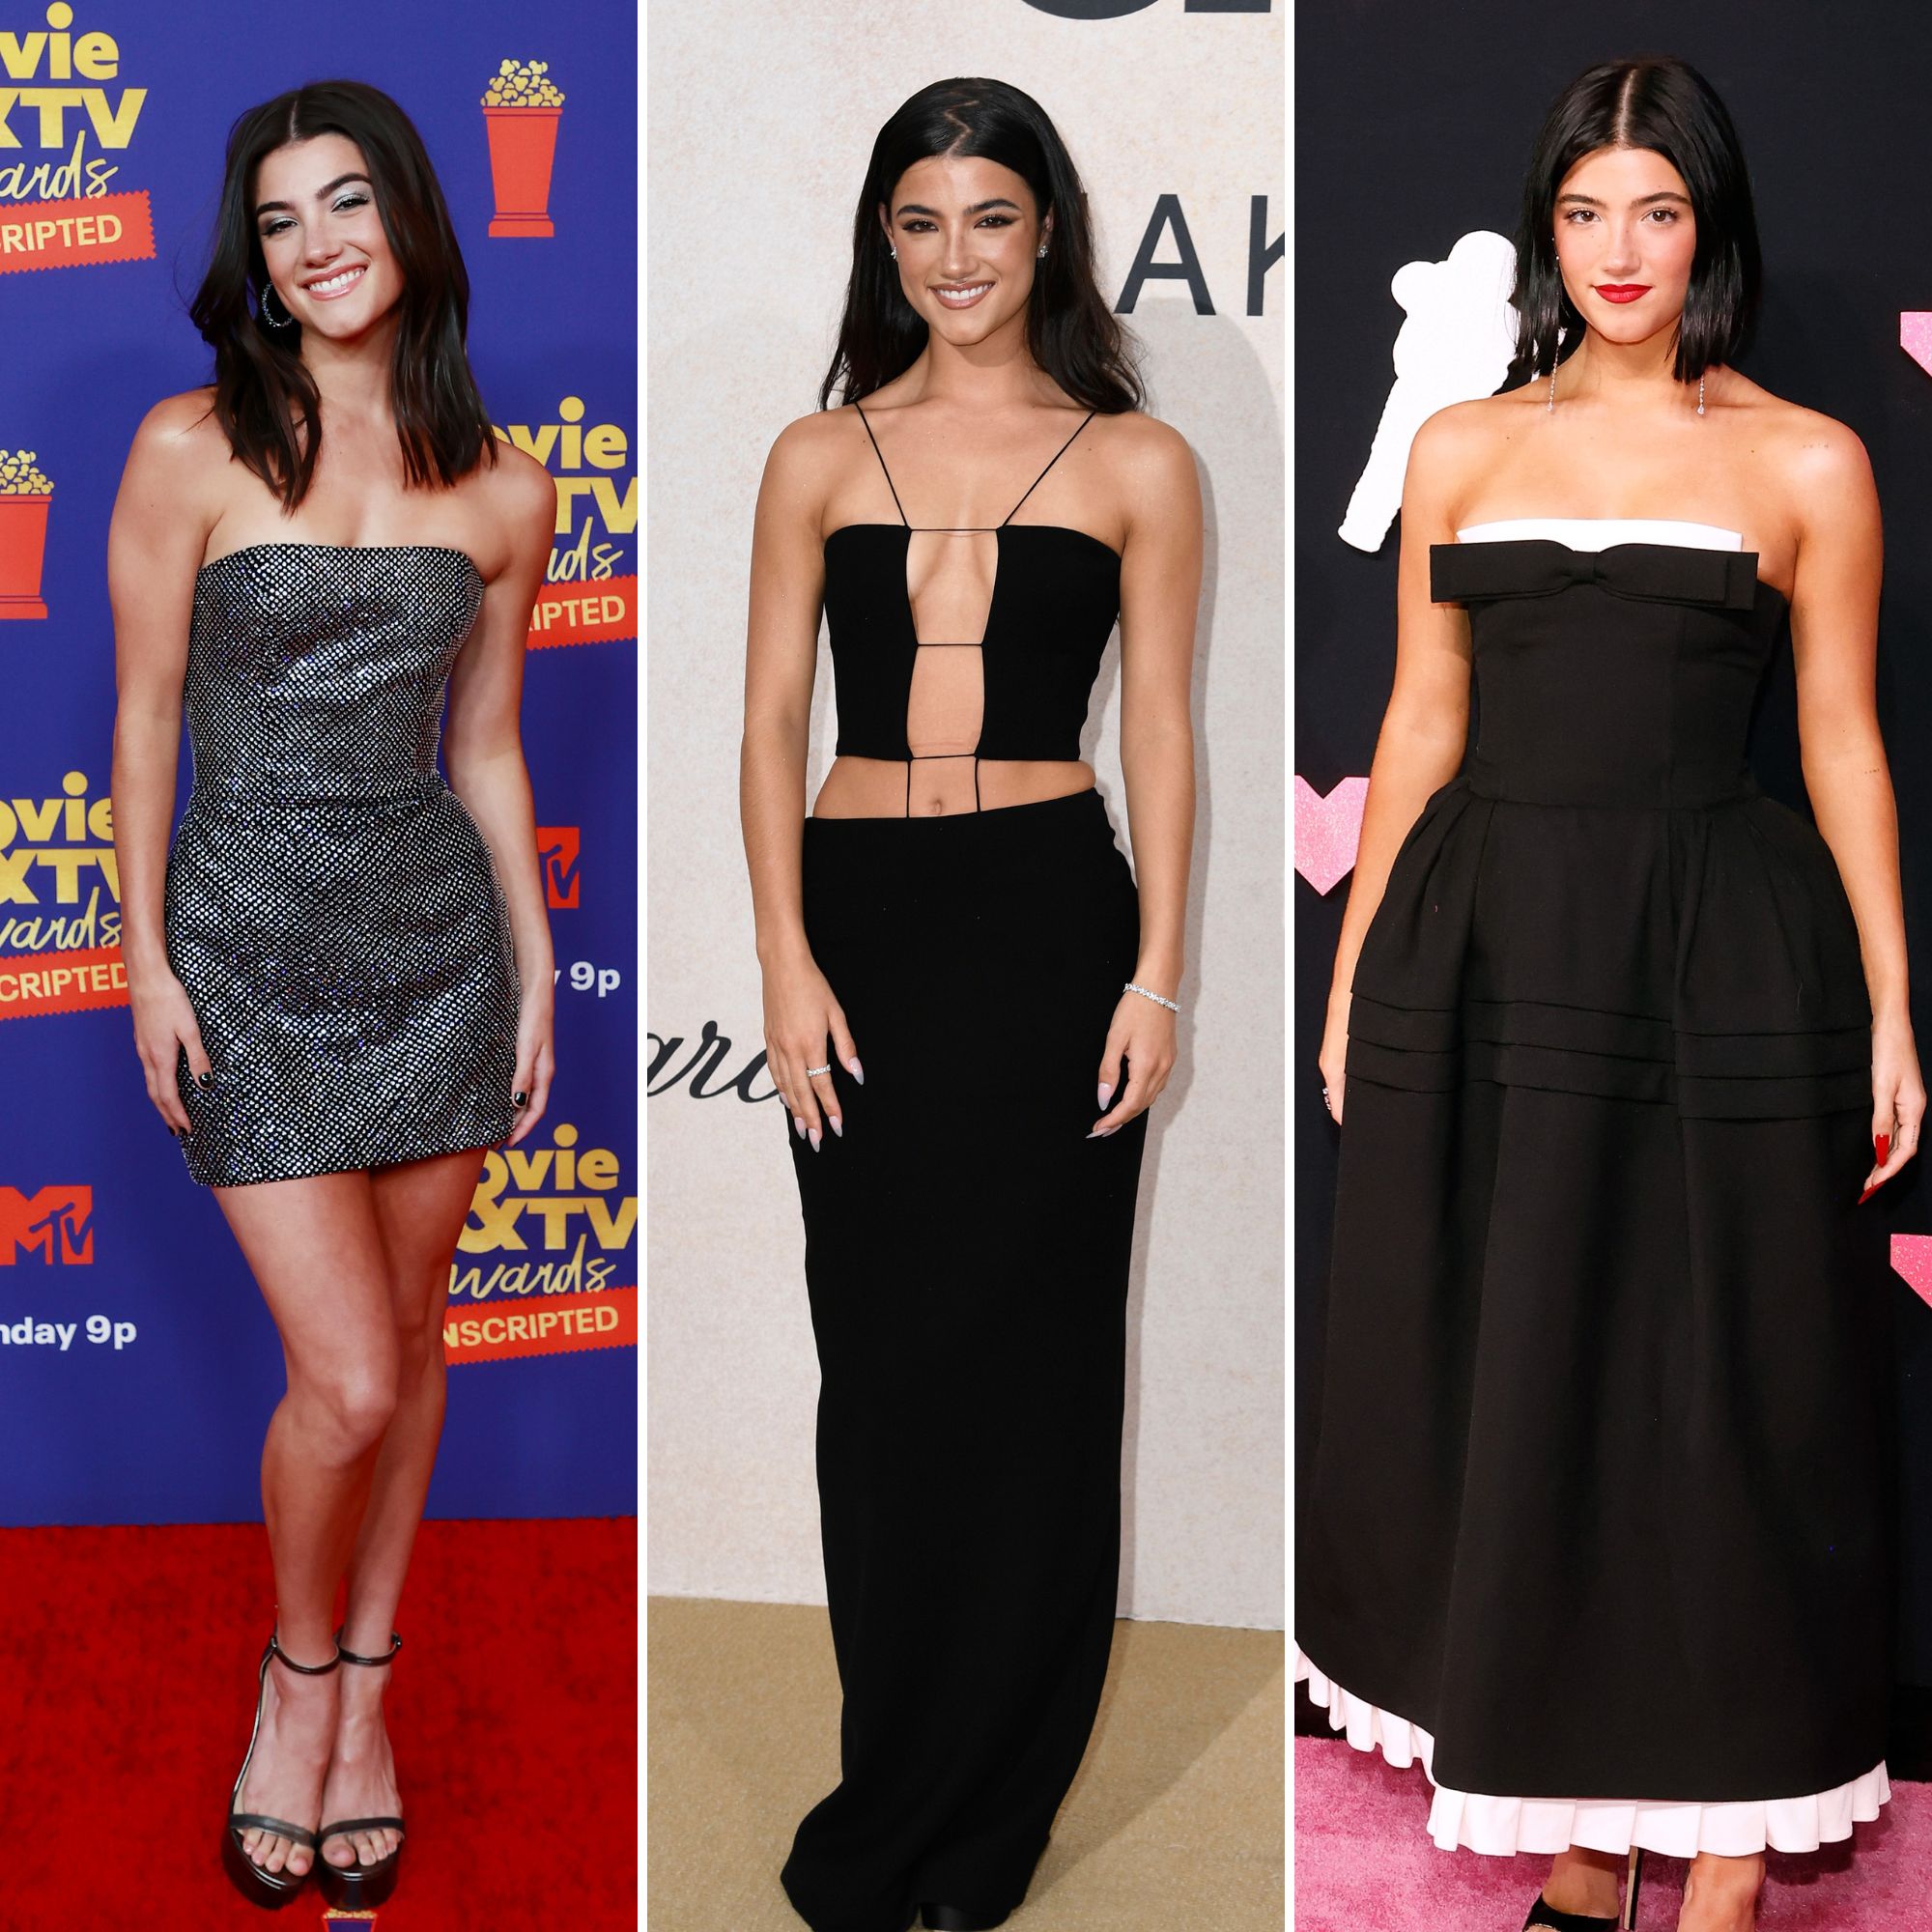 Girls' Season 4: See What the Stars Wore to the Premiere - Fashionista